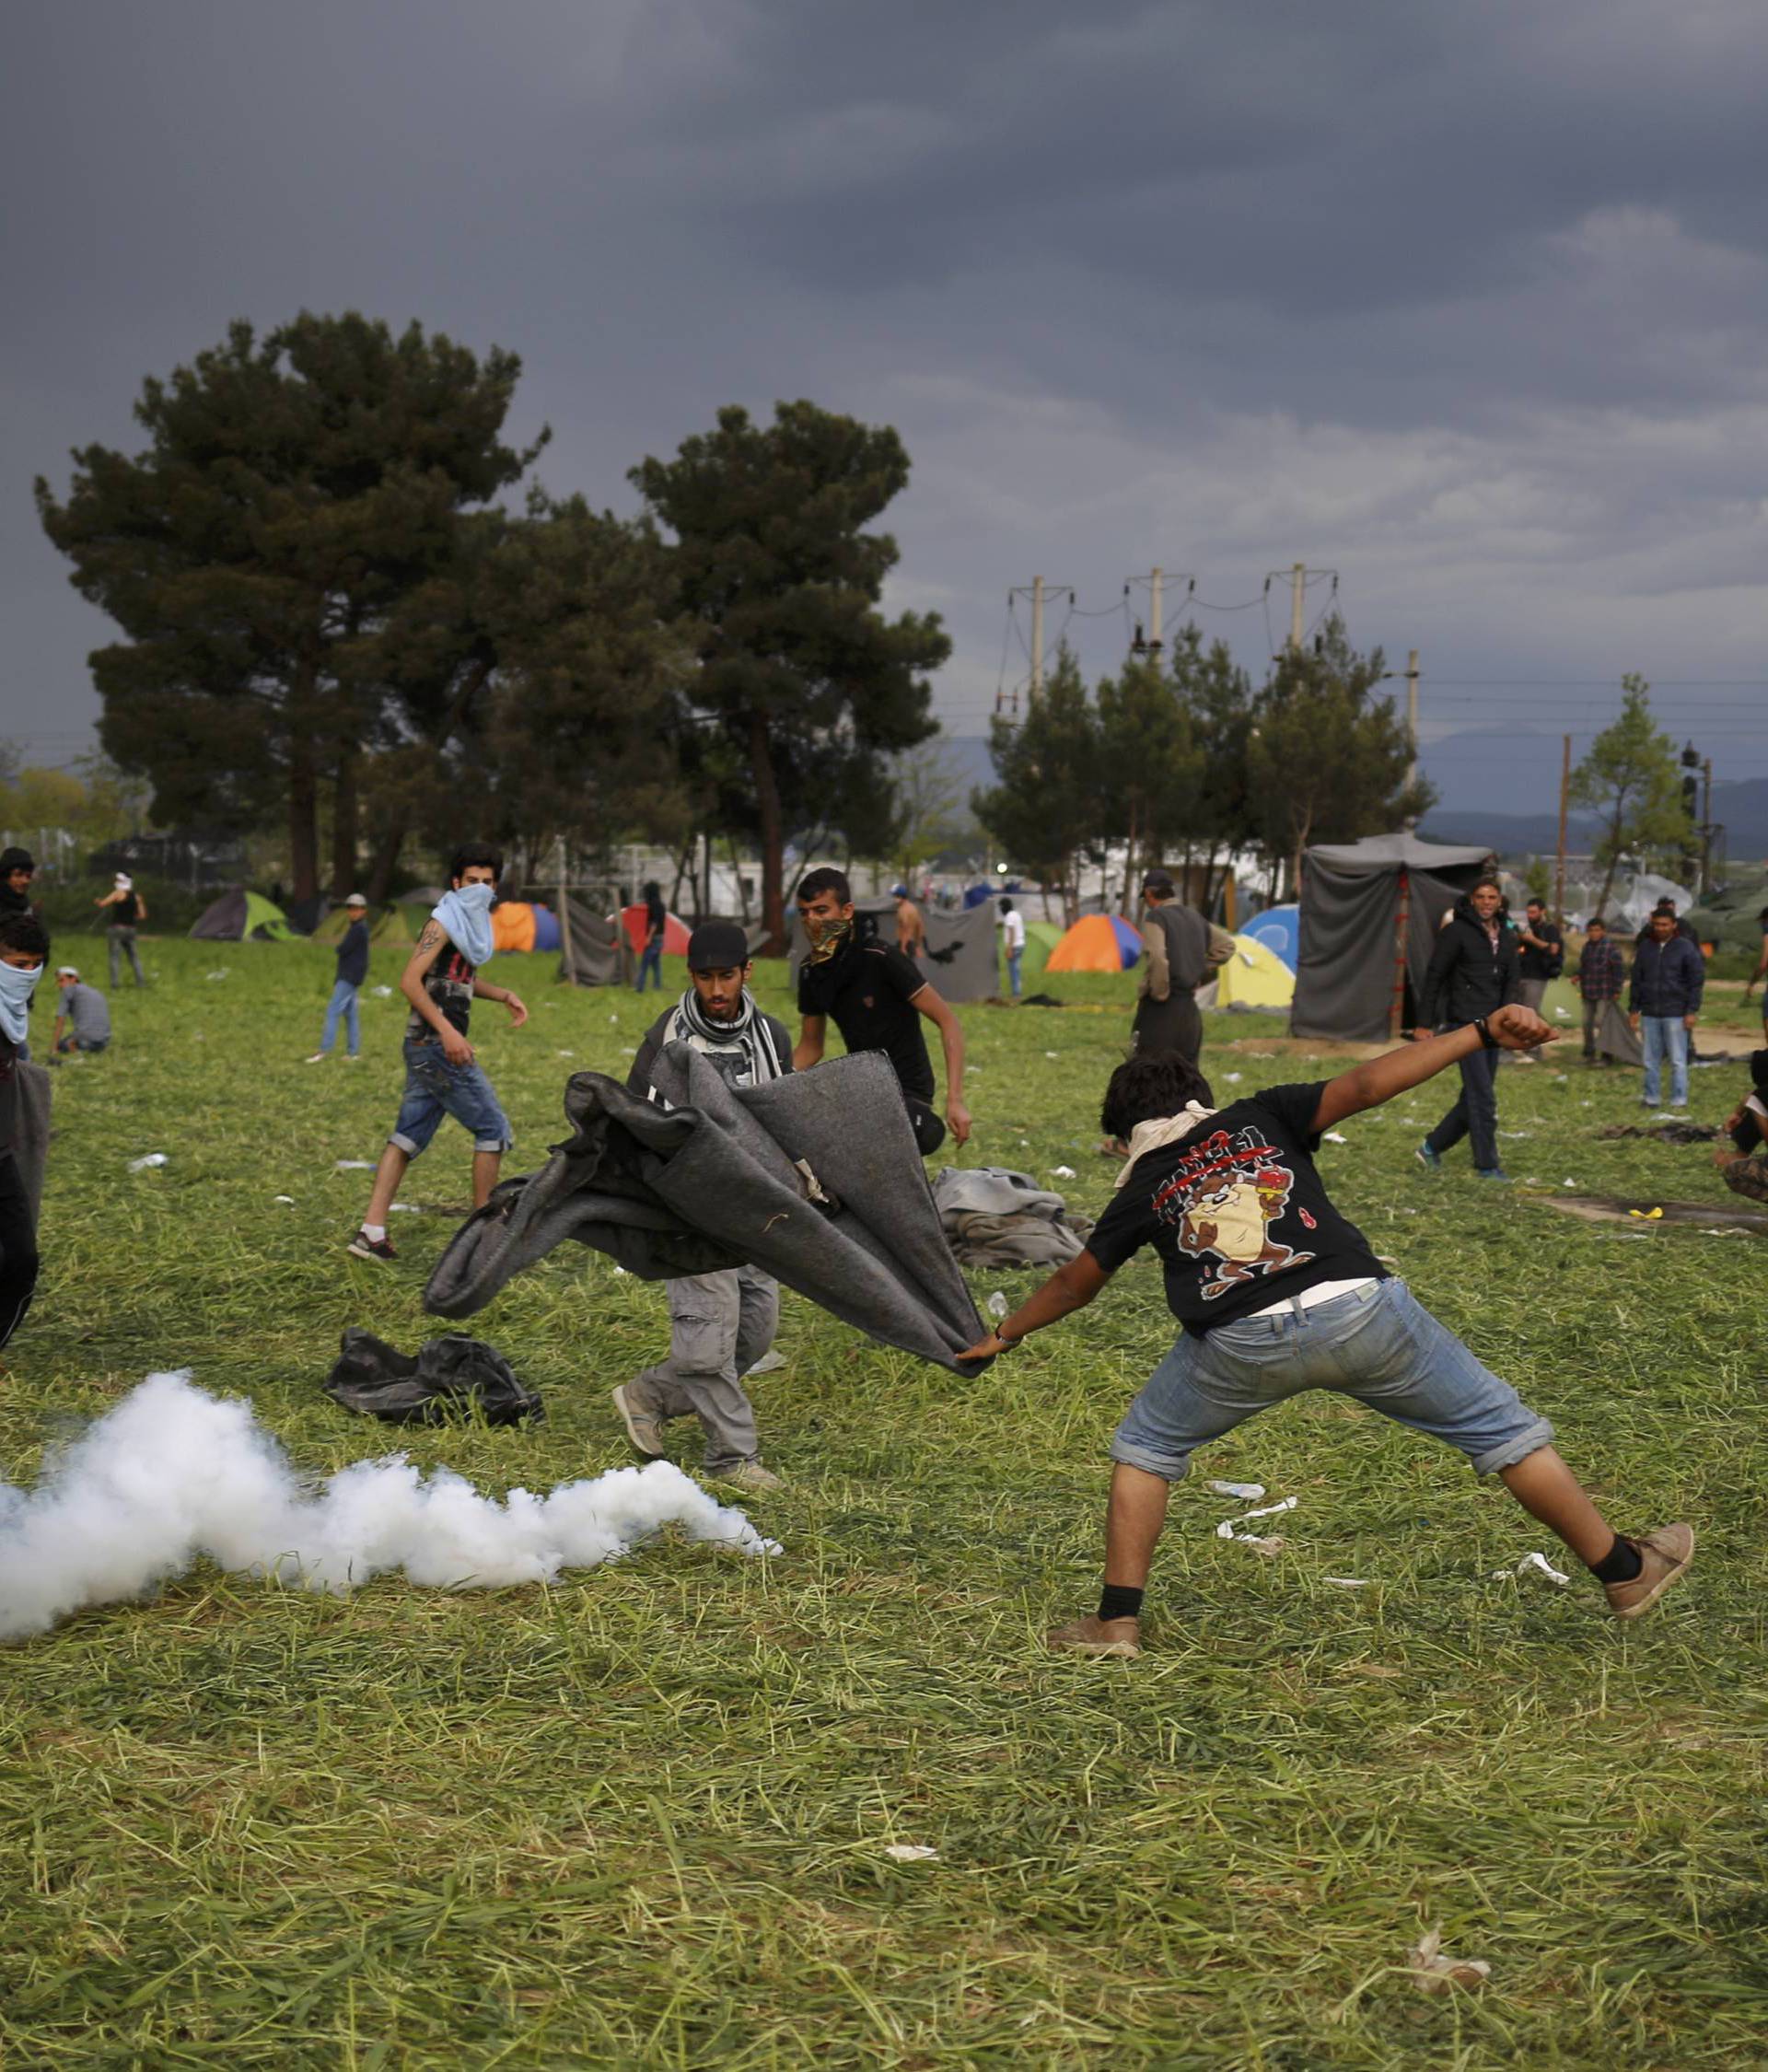 A protesting migrant tries to extinguish a teargas canister during clashes at the Greek-Macedonian border near Idomeni